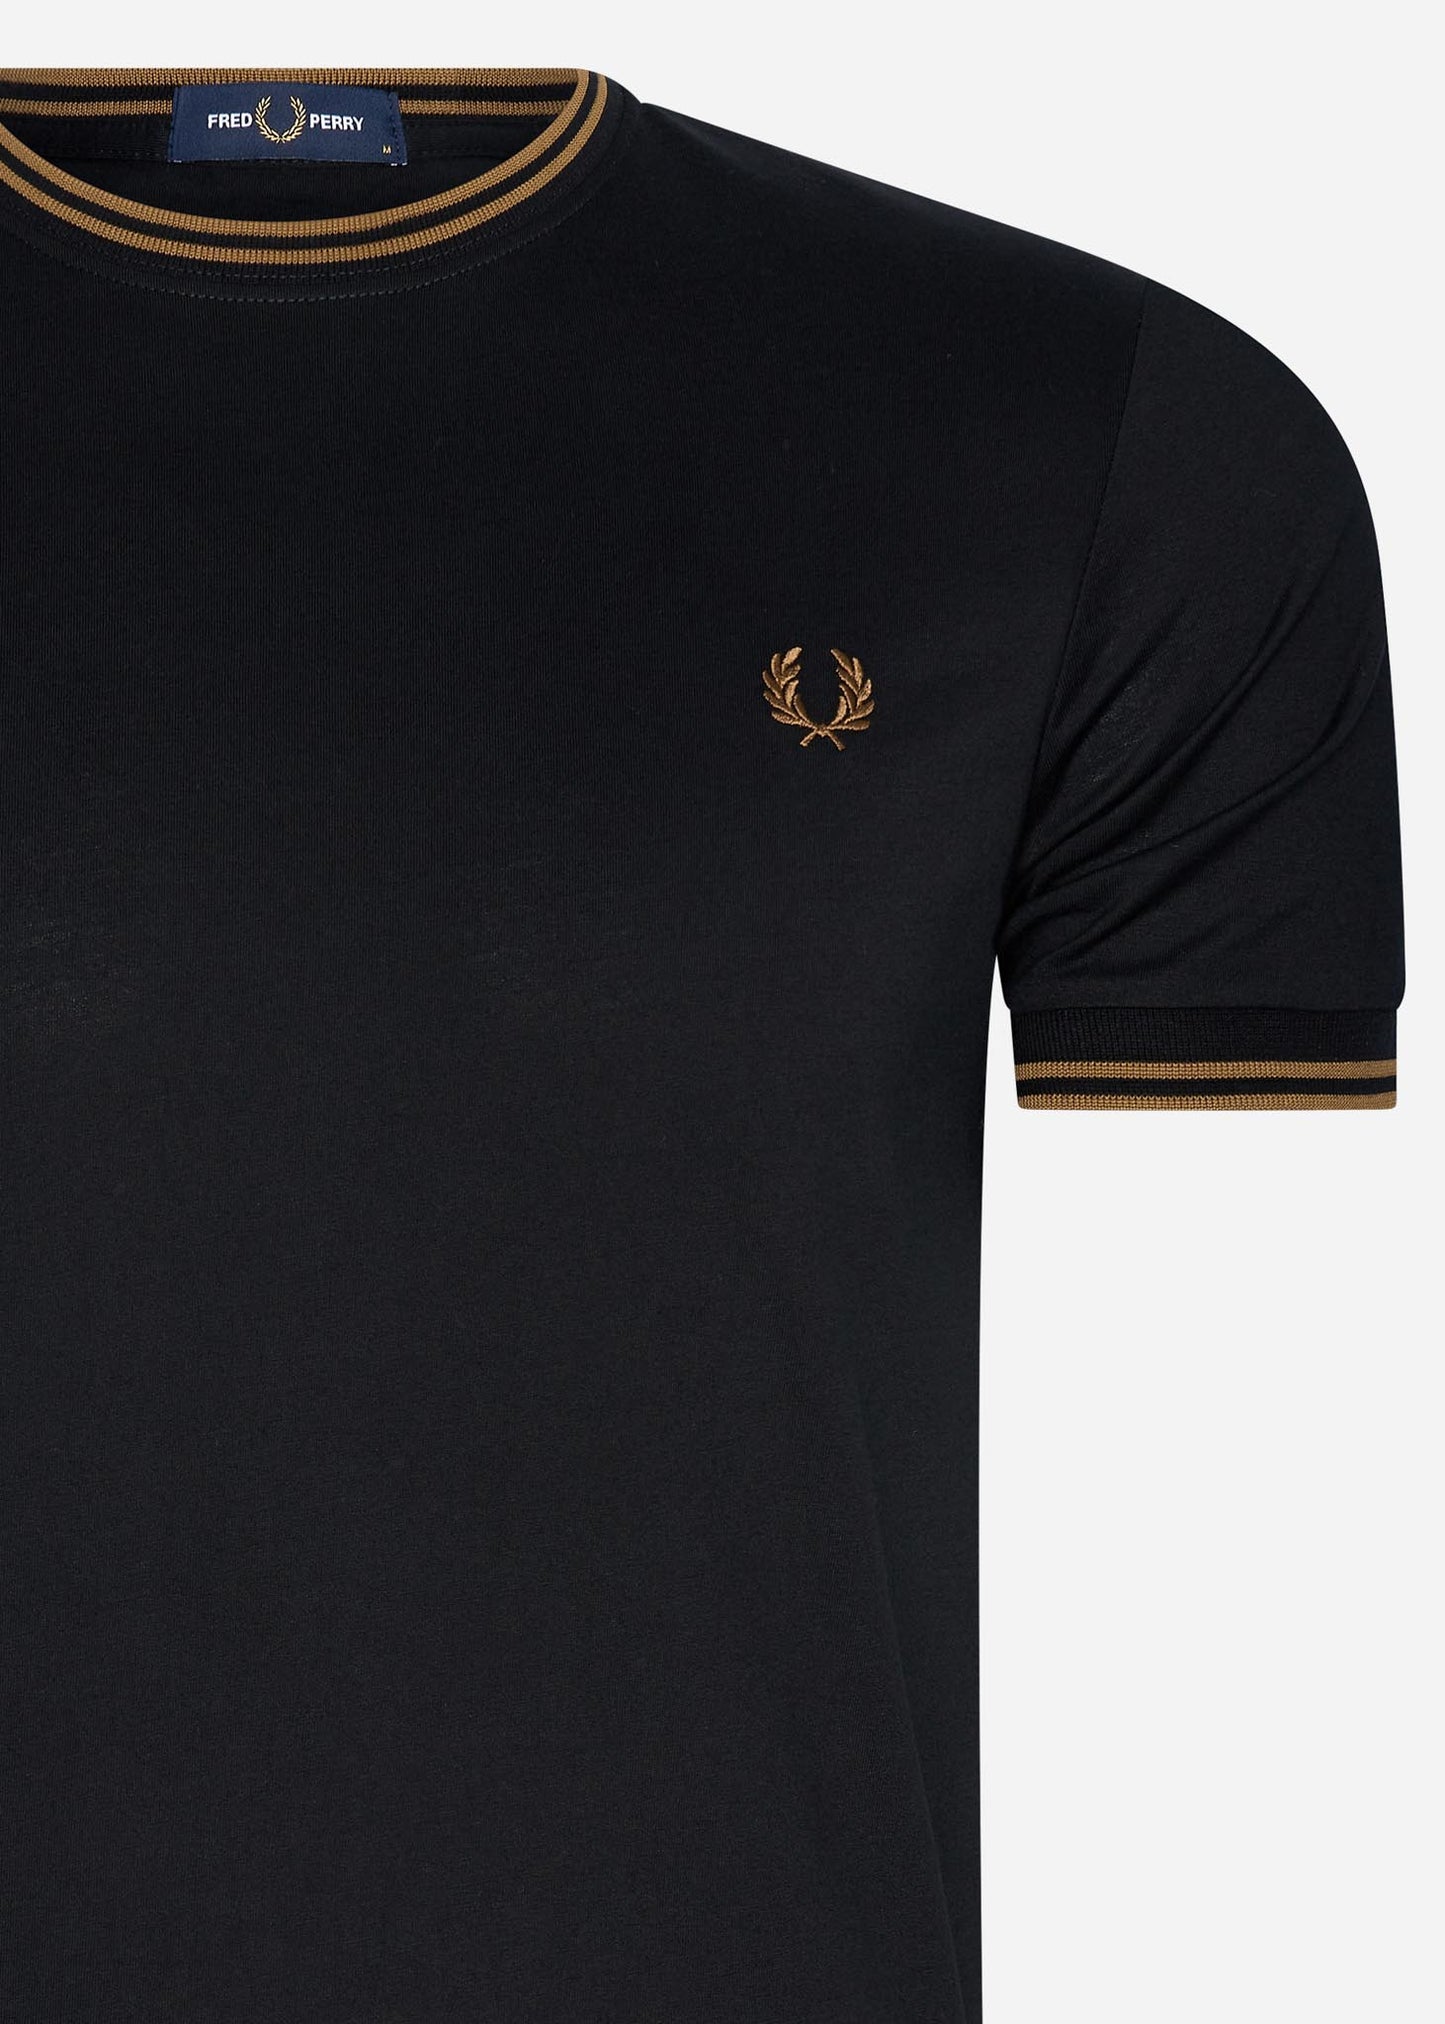 fred perry twin tipped t-shirt black shade stone